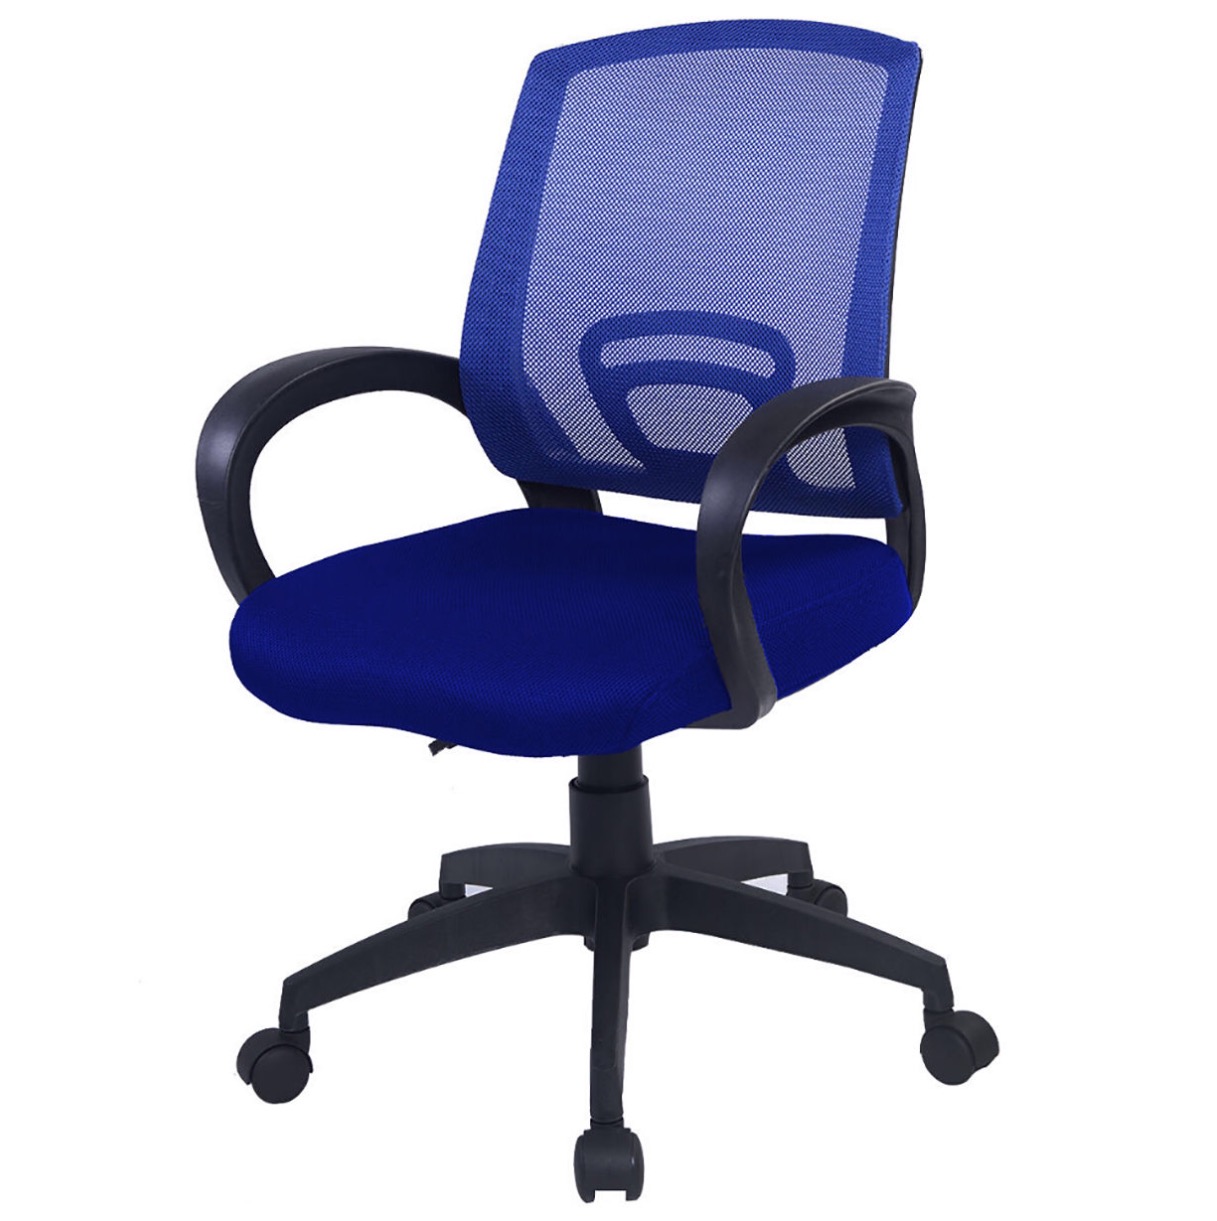 Student or Office mesh armchair  matching seat  and back colours blue